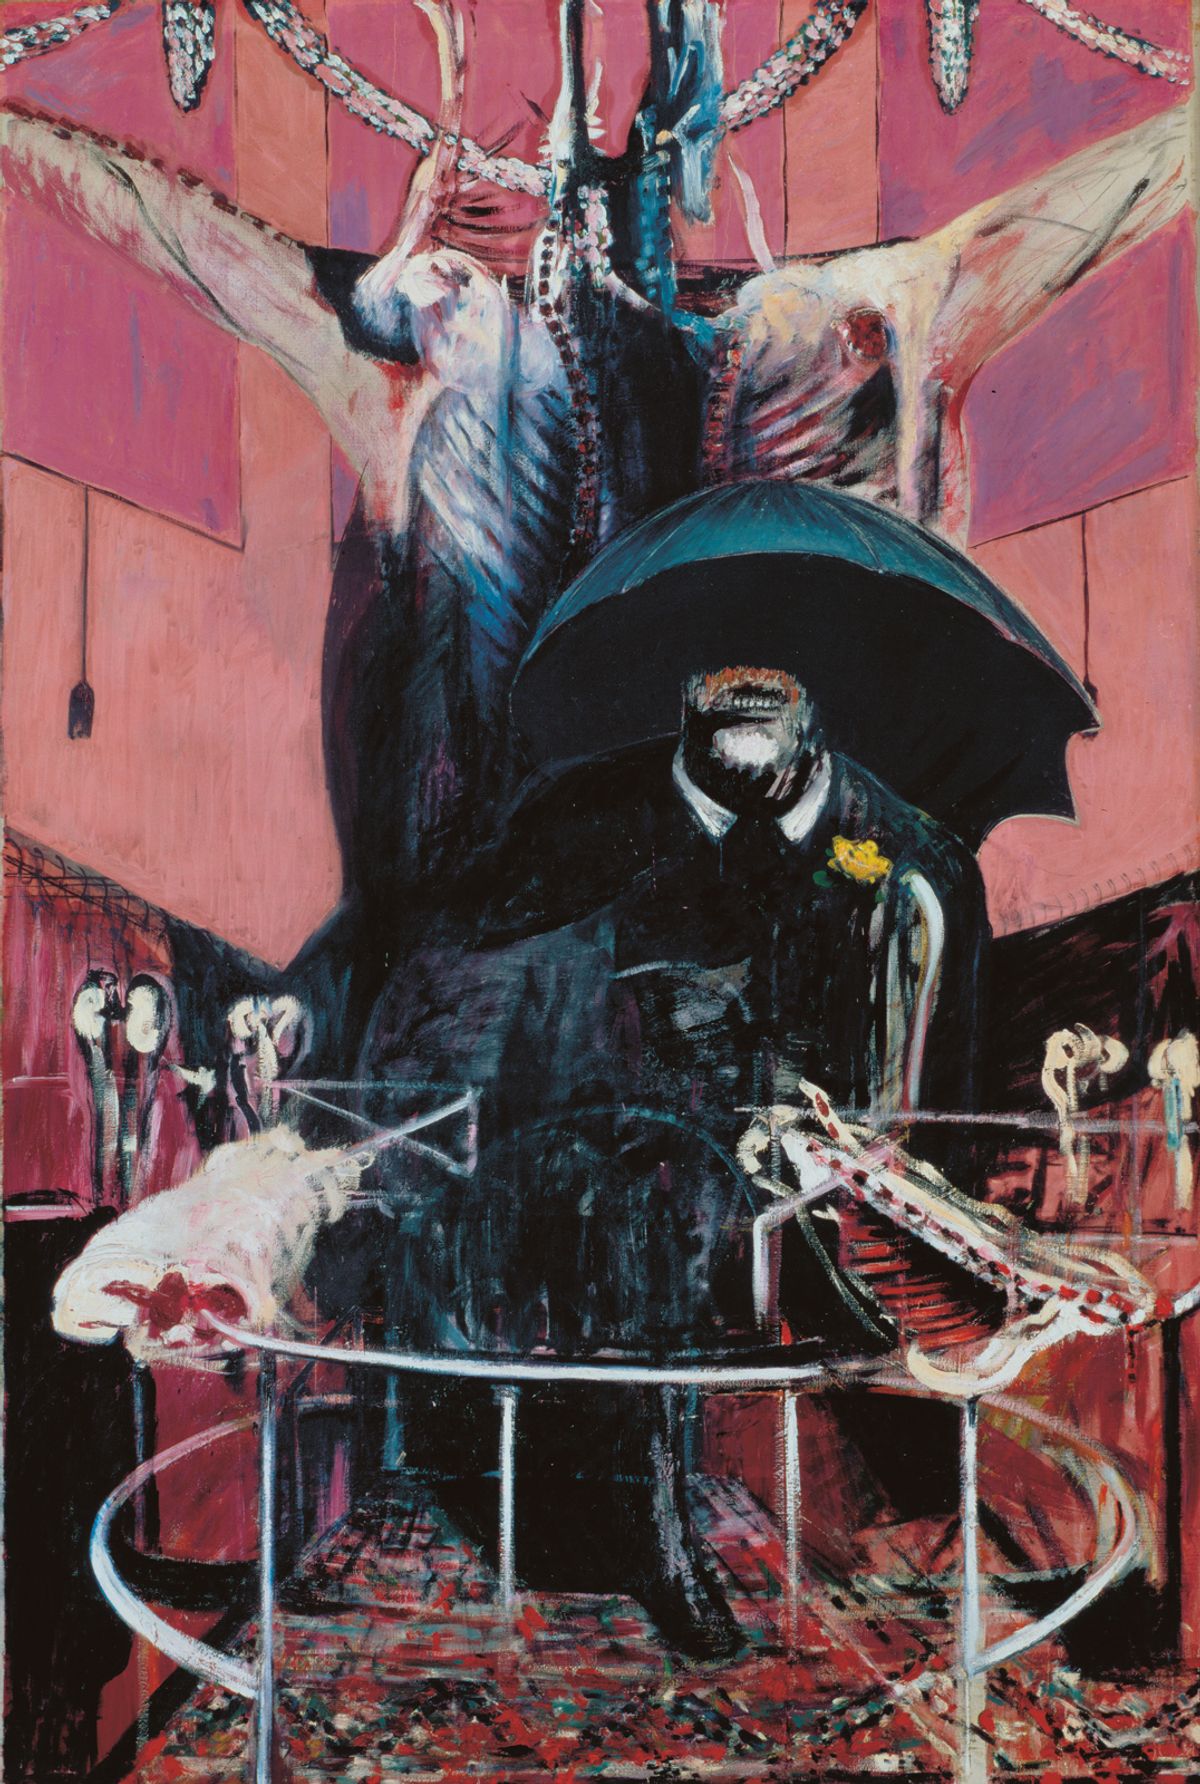 Francis  Bacon's Painting 1946 The Estate of Francis Bacon. All rights reserved. Photo Prudence Cuming Associates Ltd